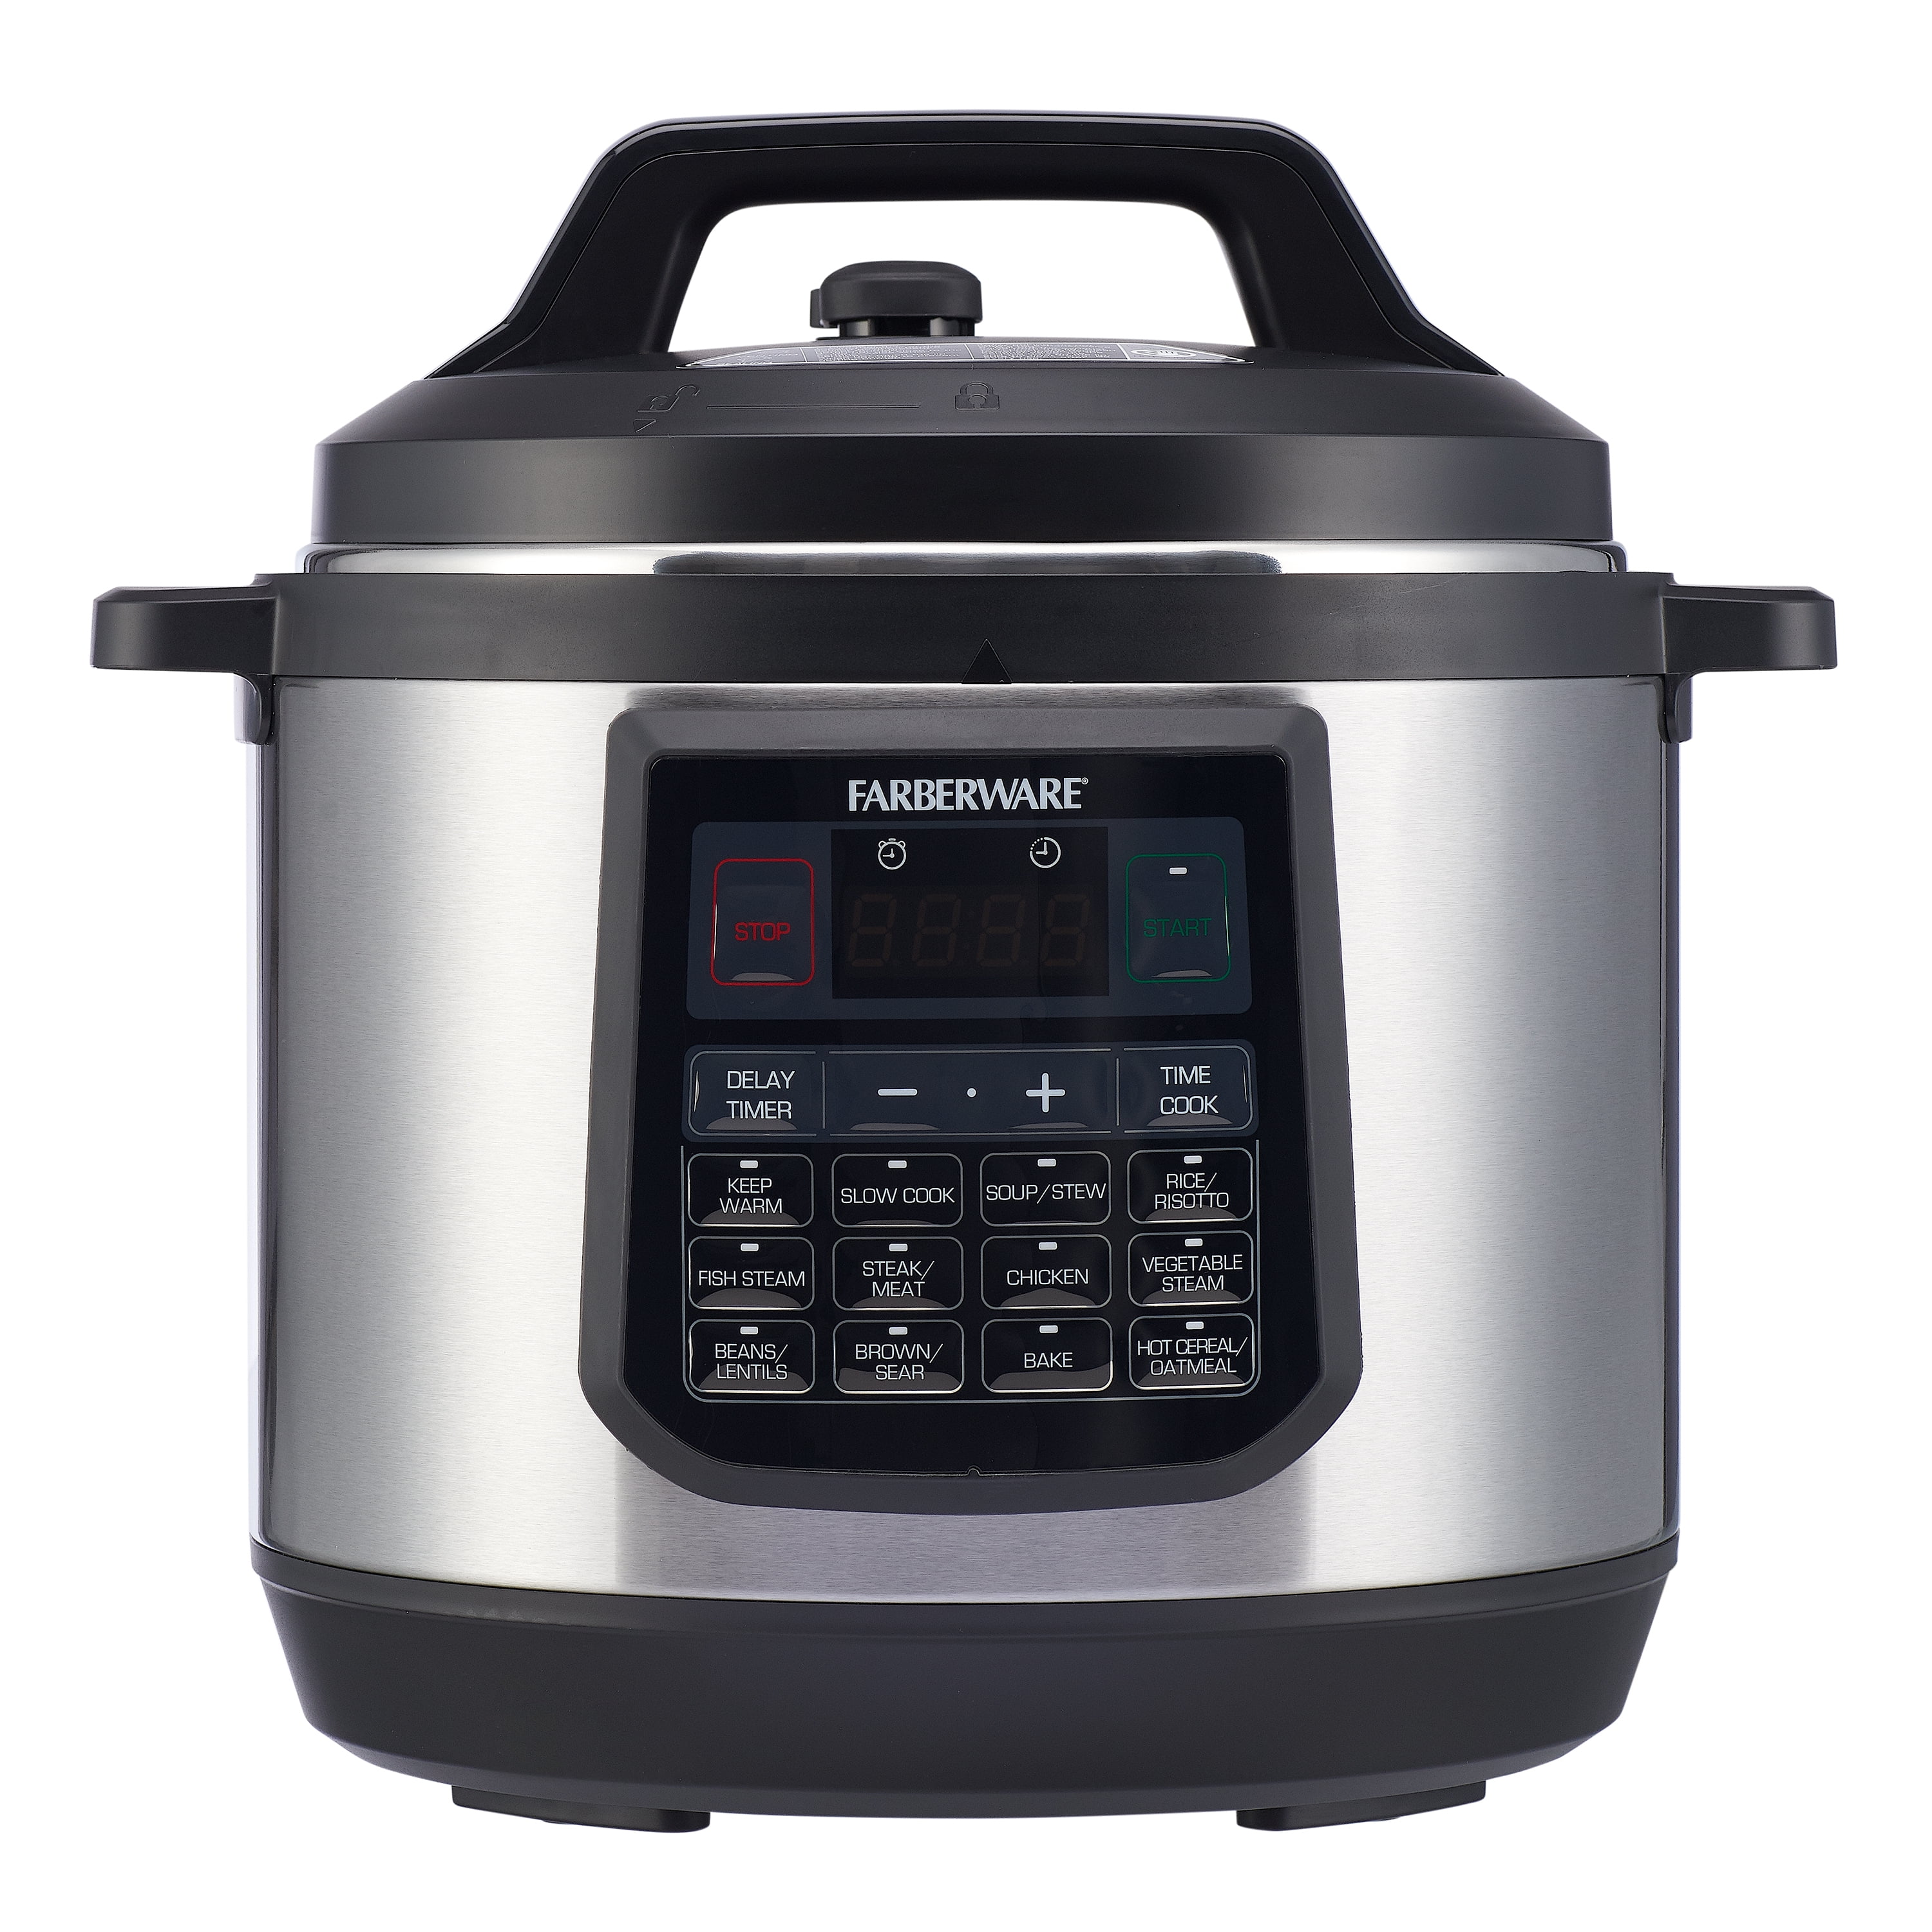 Farberware pressure cooker unboxing and review 